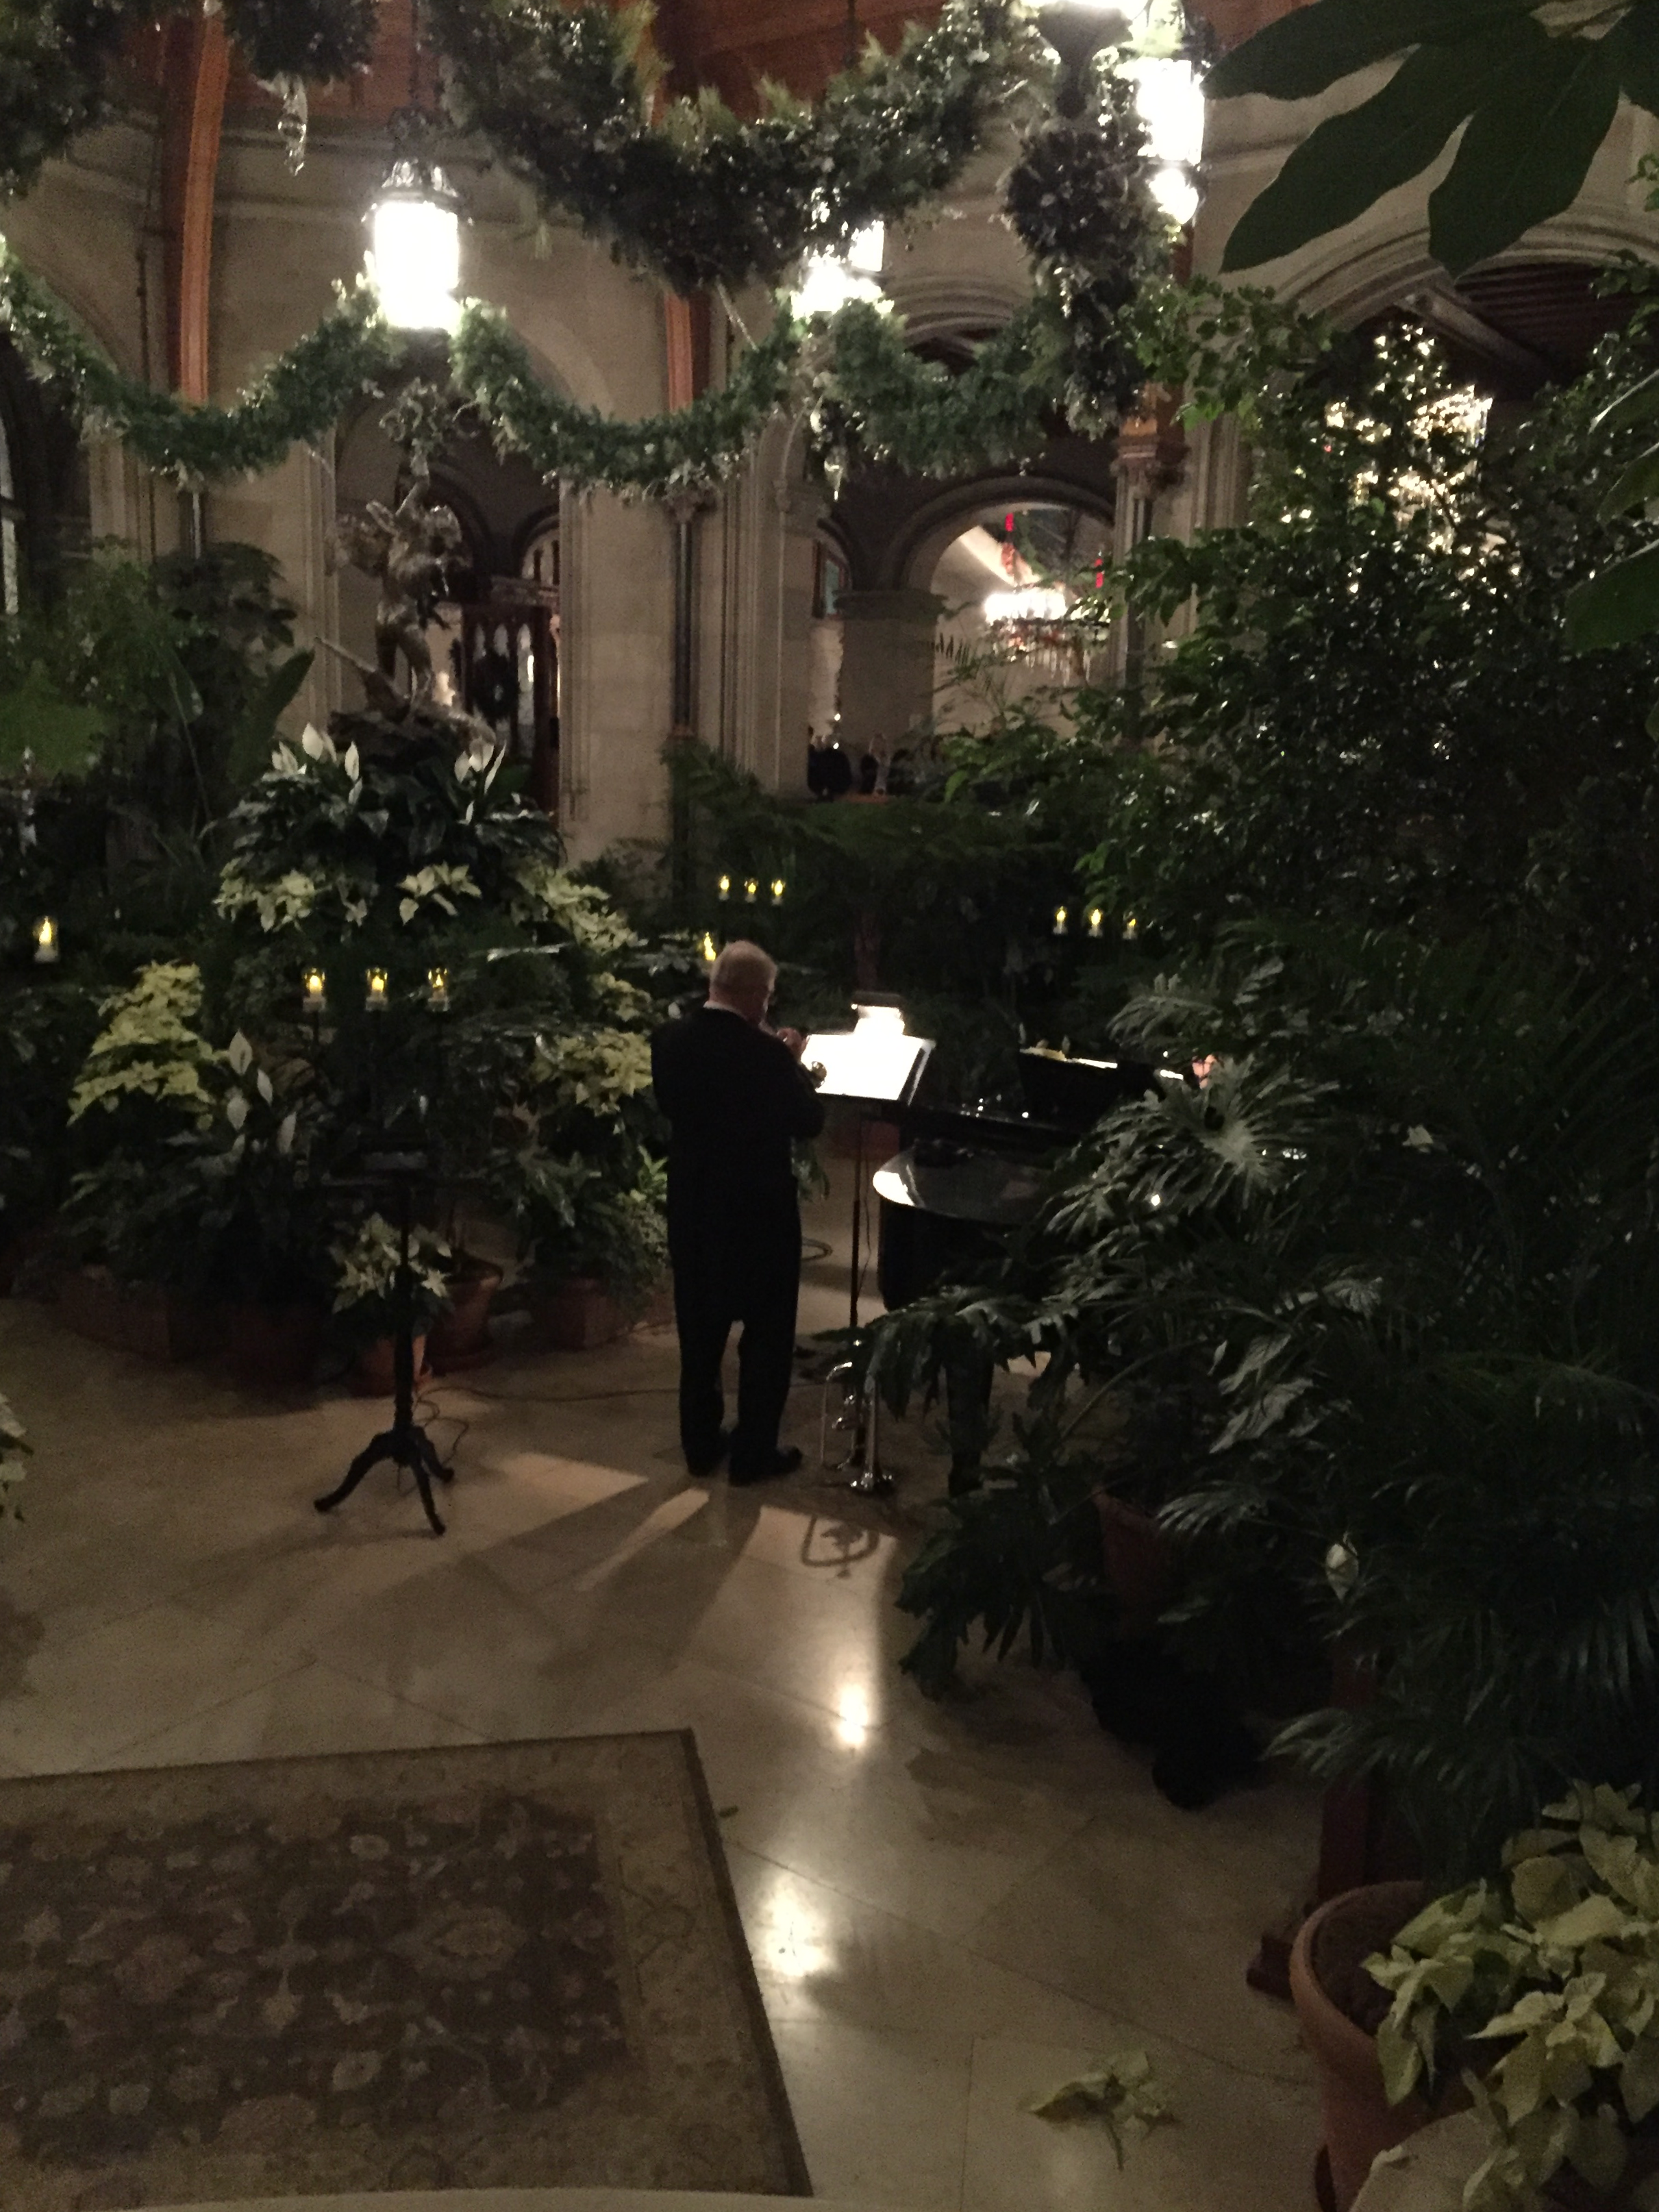 A musician plays amid the greenery in the atrium.